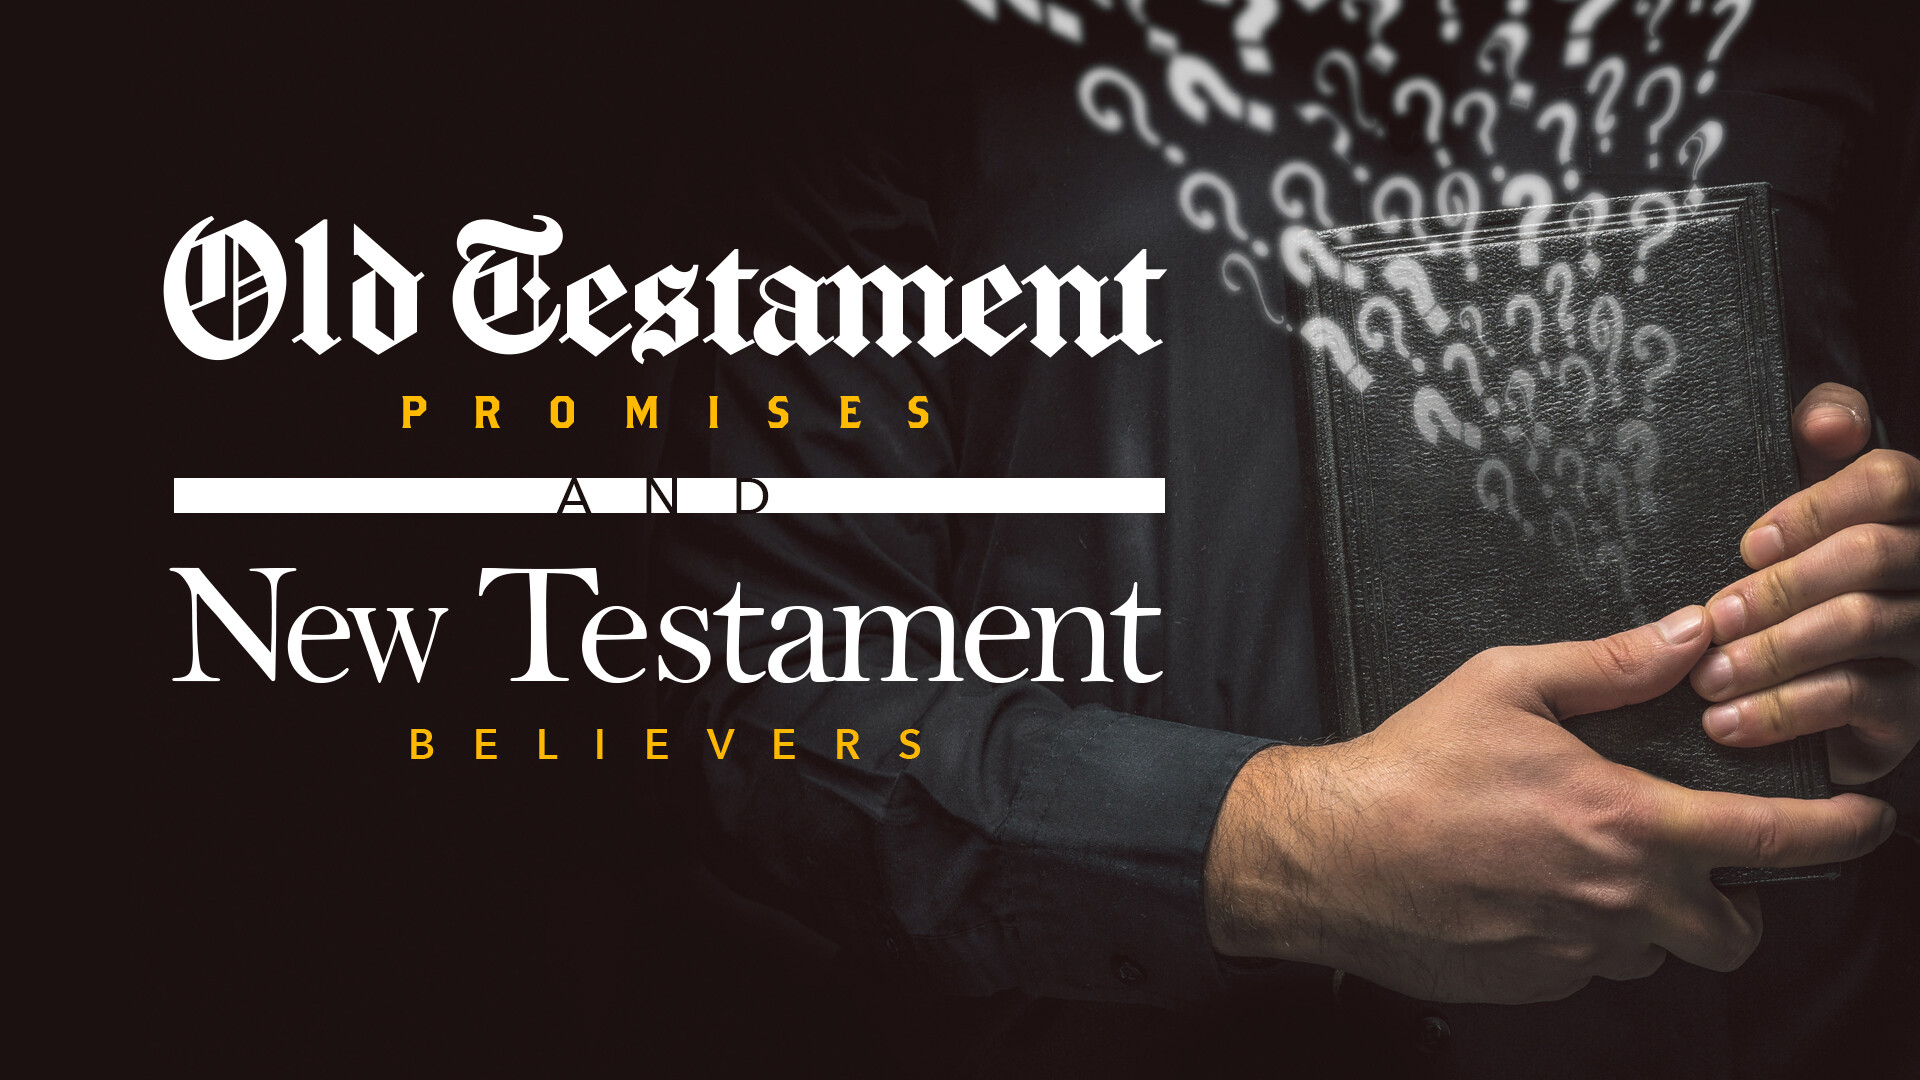 Old Testament Promises and New Testament Believers - Part 1